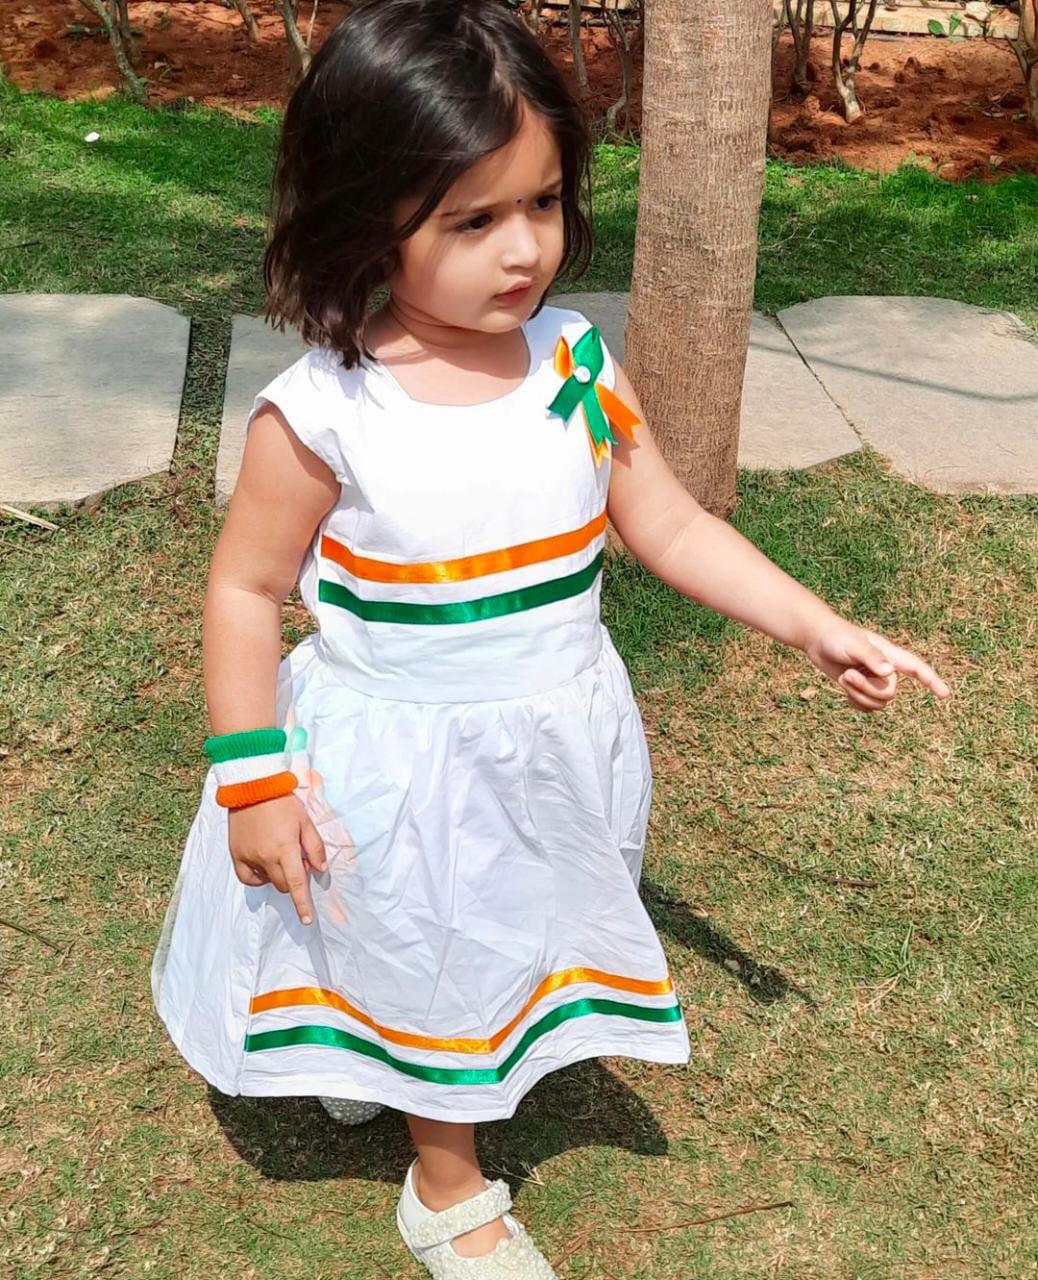 Kaku Fancy Dresses Girls Frock Costume For Independence Day/Republic Day  -Multicolour, 3-4 Years, For Girls : Amazon.in: Clothing & Accessories